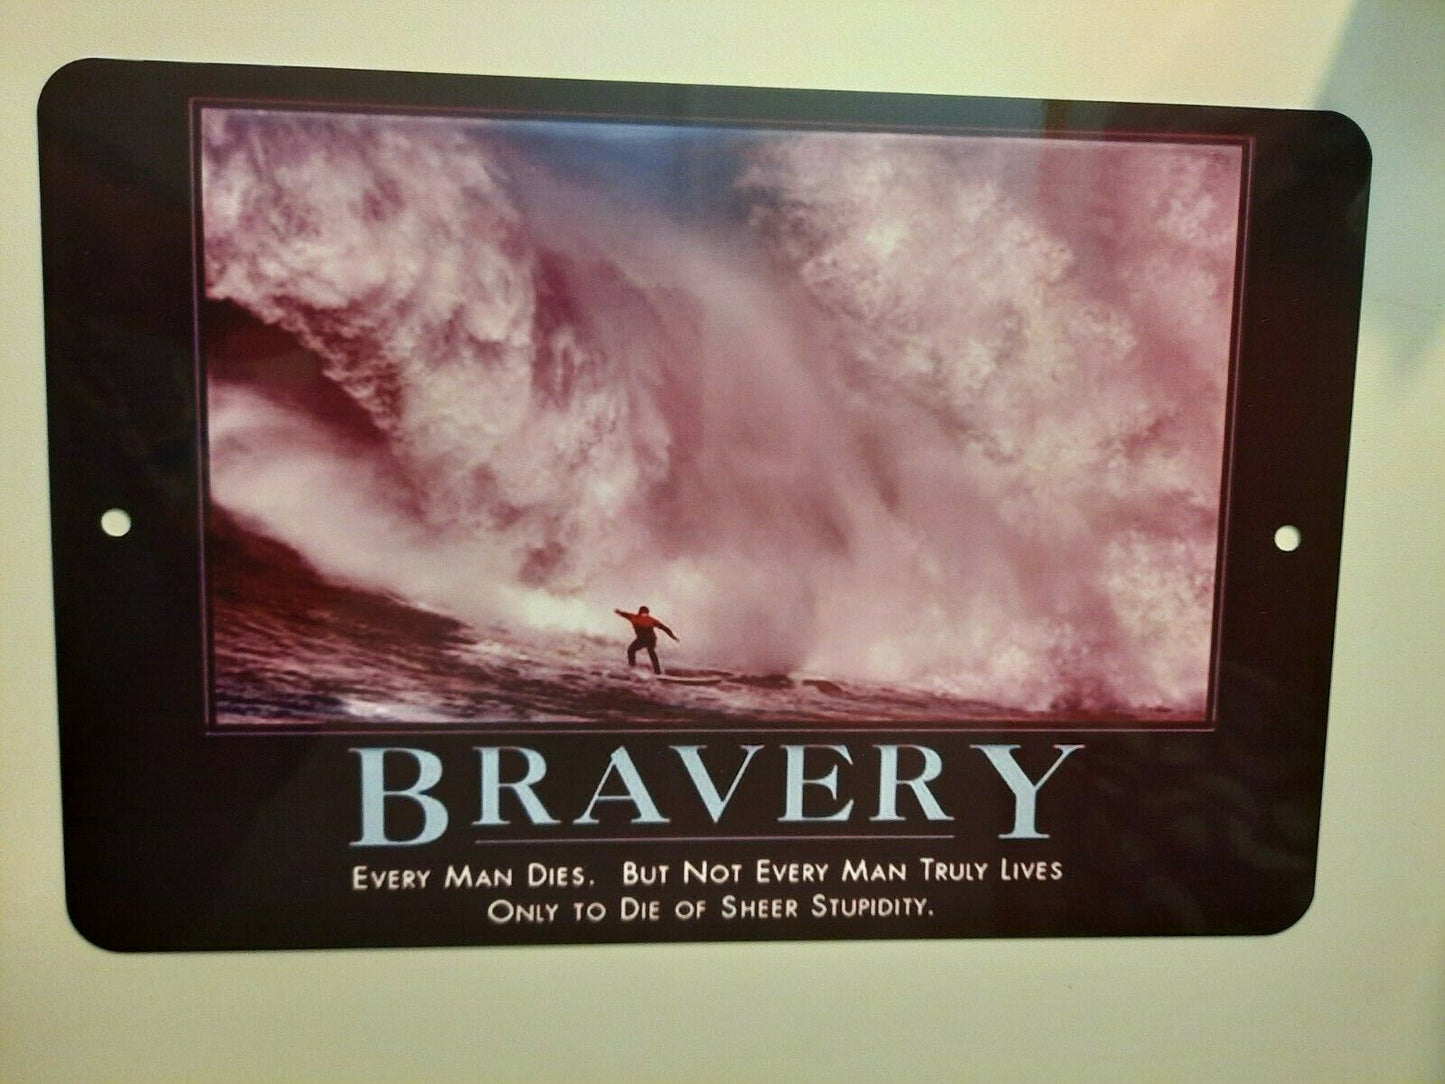 Bravery Quote Funny 8x12 Metal Wall Sign Every Man Dies Phrases Misc Poster